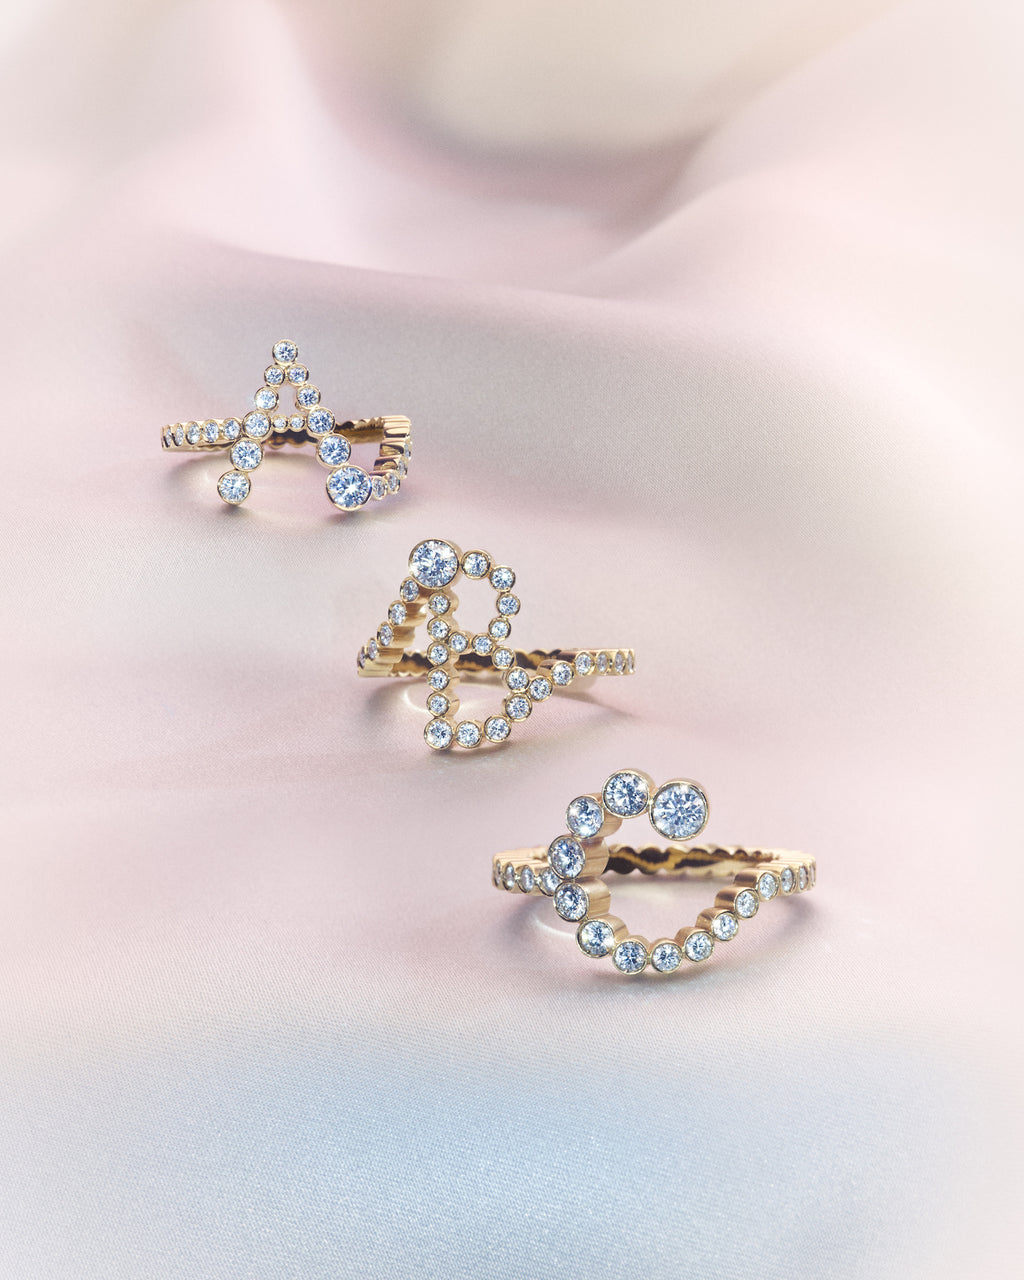 Three 18K yellow gold diamond rings shaped in the letters 'A', 'B' and 'C' on a soft pink background.